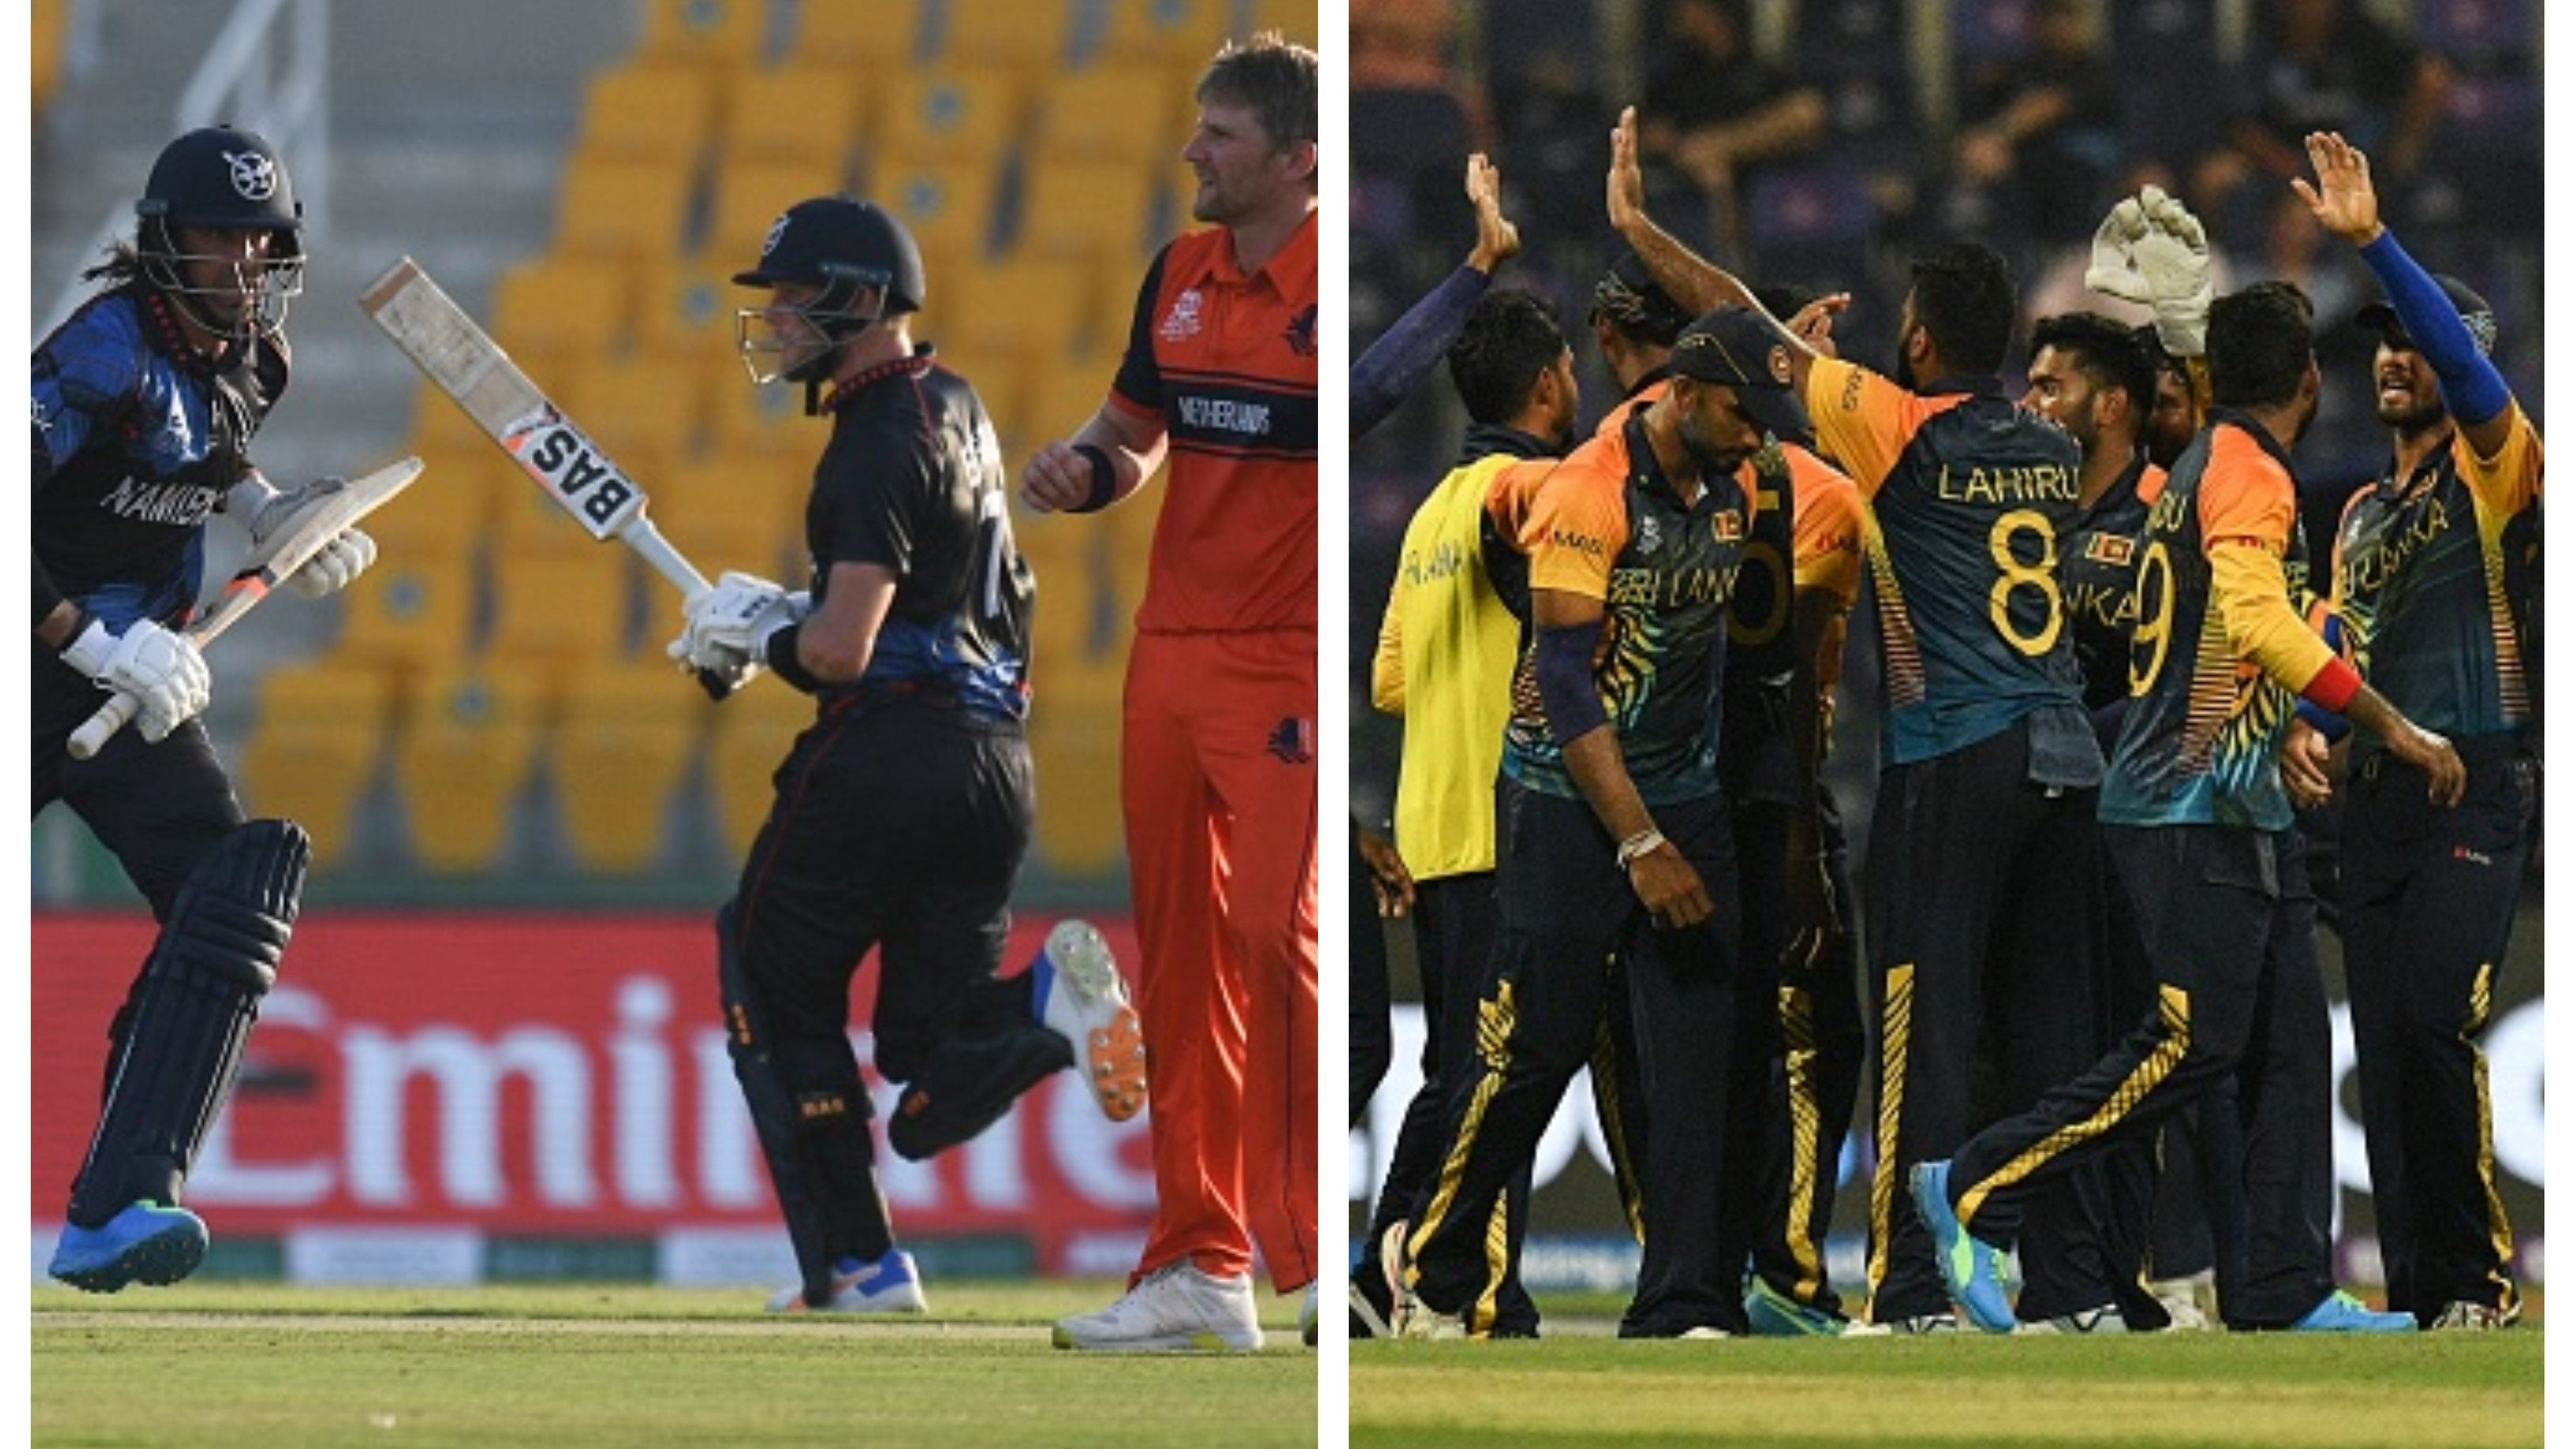 T20 World Cup 2021: Namibia beat Netherlands by 6 wickets; Sri Lanka through to Super 12s with huge win over Ireland